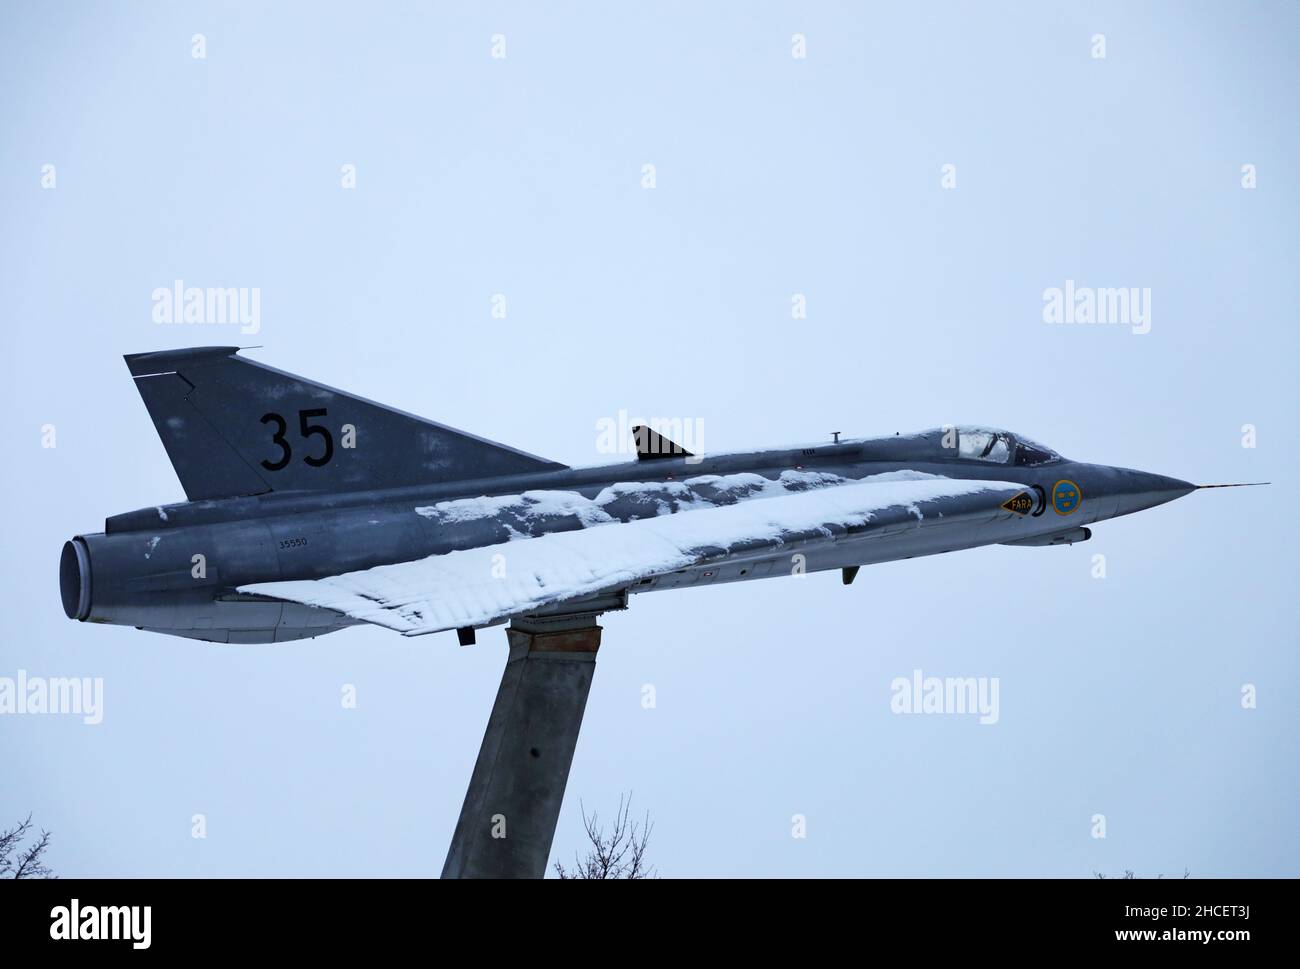 The Saab 35 Draken, J 35 Draken, fighter jet, ouside Saab AB in Linköping,  Sweden. On Friday, the Finnish government announced that it would buy 64  American F-35 fighter jets instead of